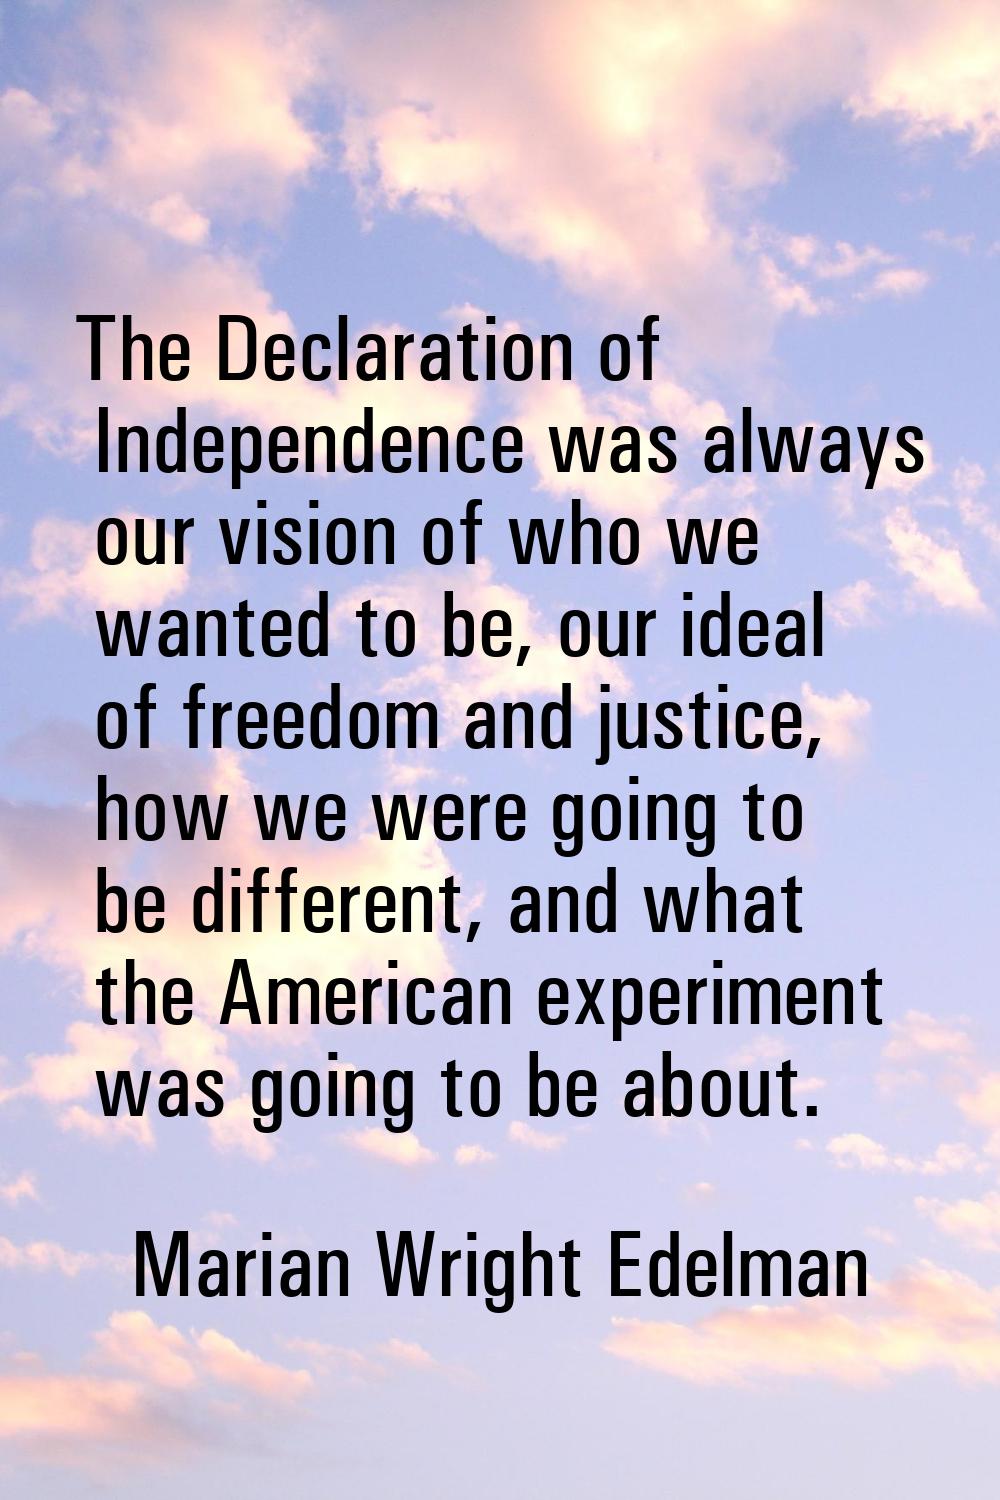 The Declaration of Independence was always our vision of who we wanted to be, our ideal of freedom 